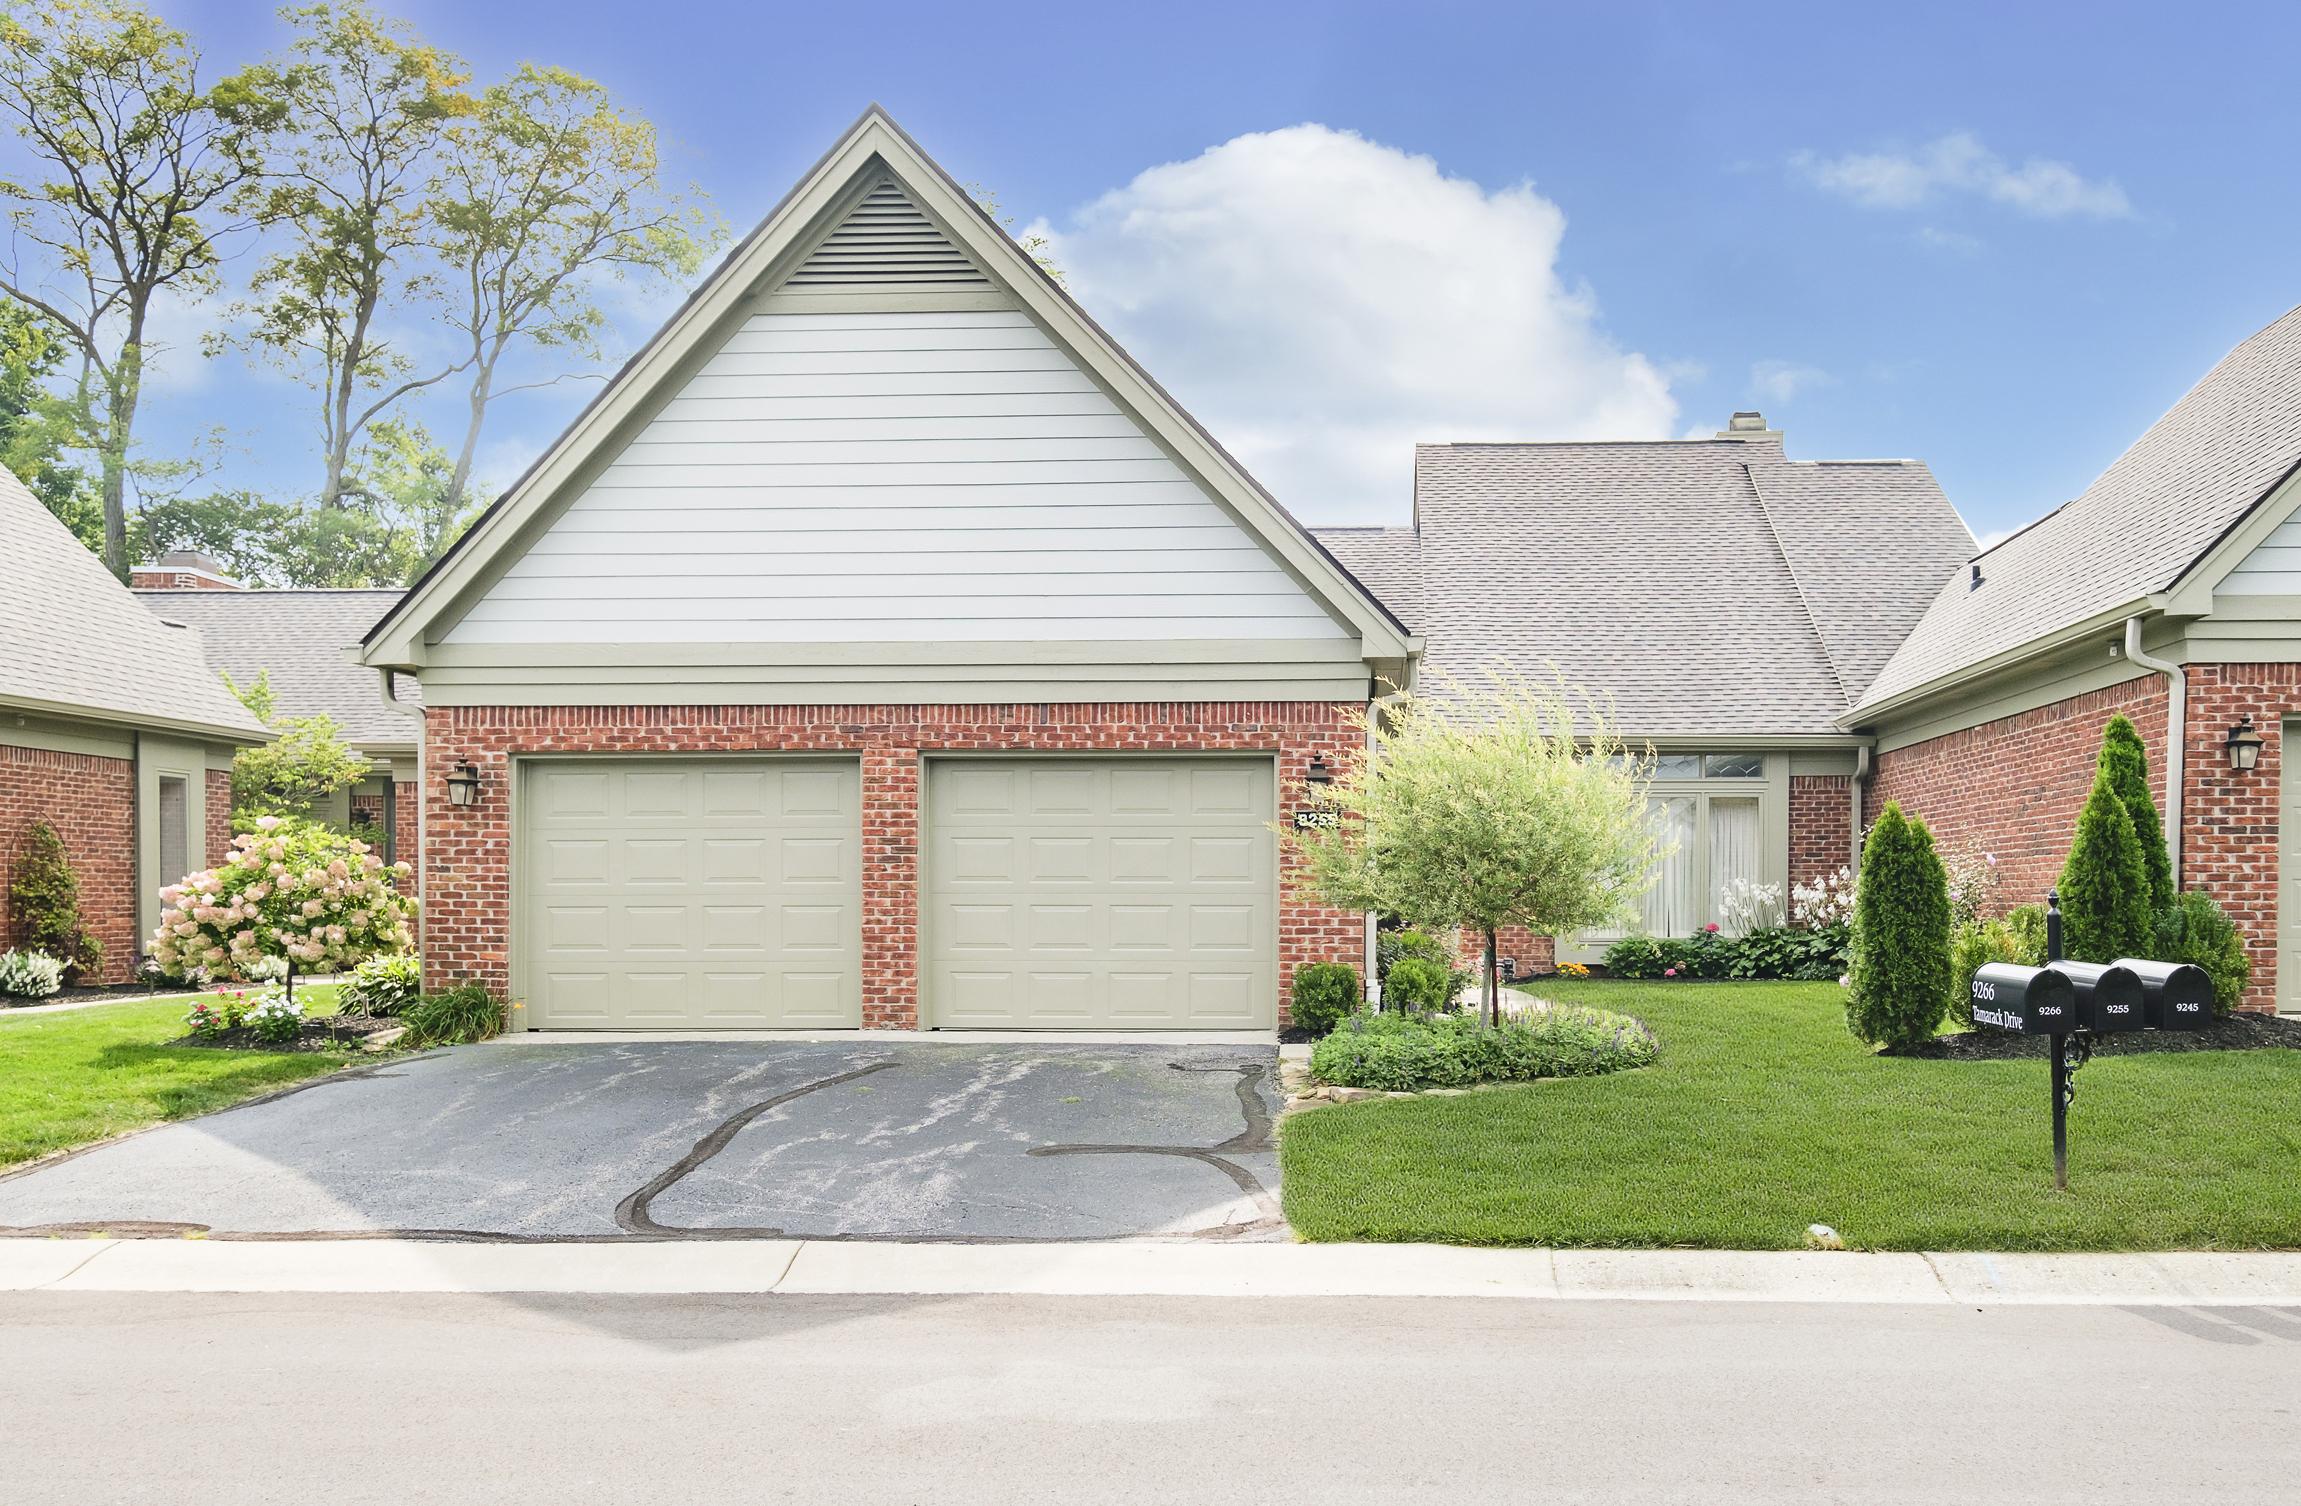 Photo one of 9255 Tamarack Dr # 30 Indianapolis IN 46260 | MLS 21939492